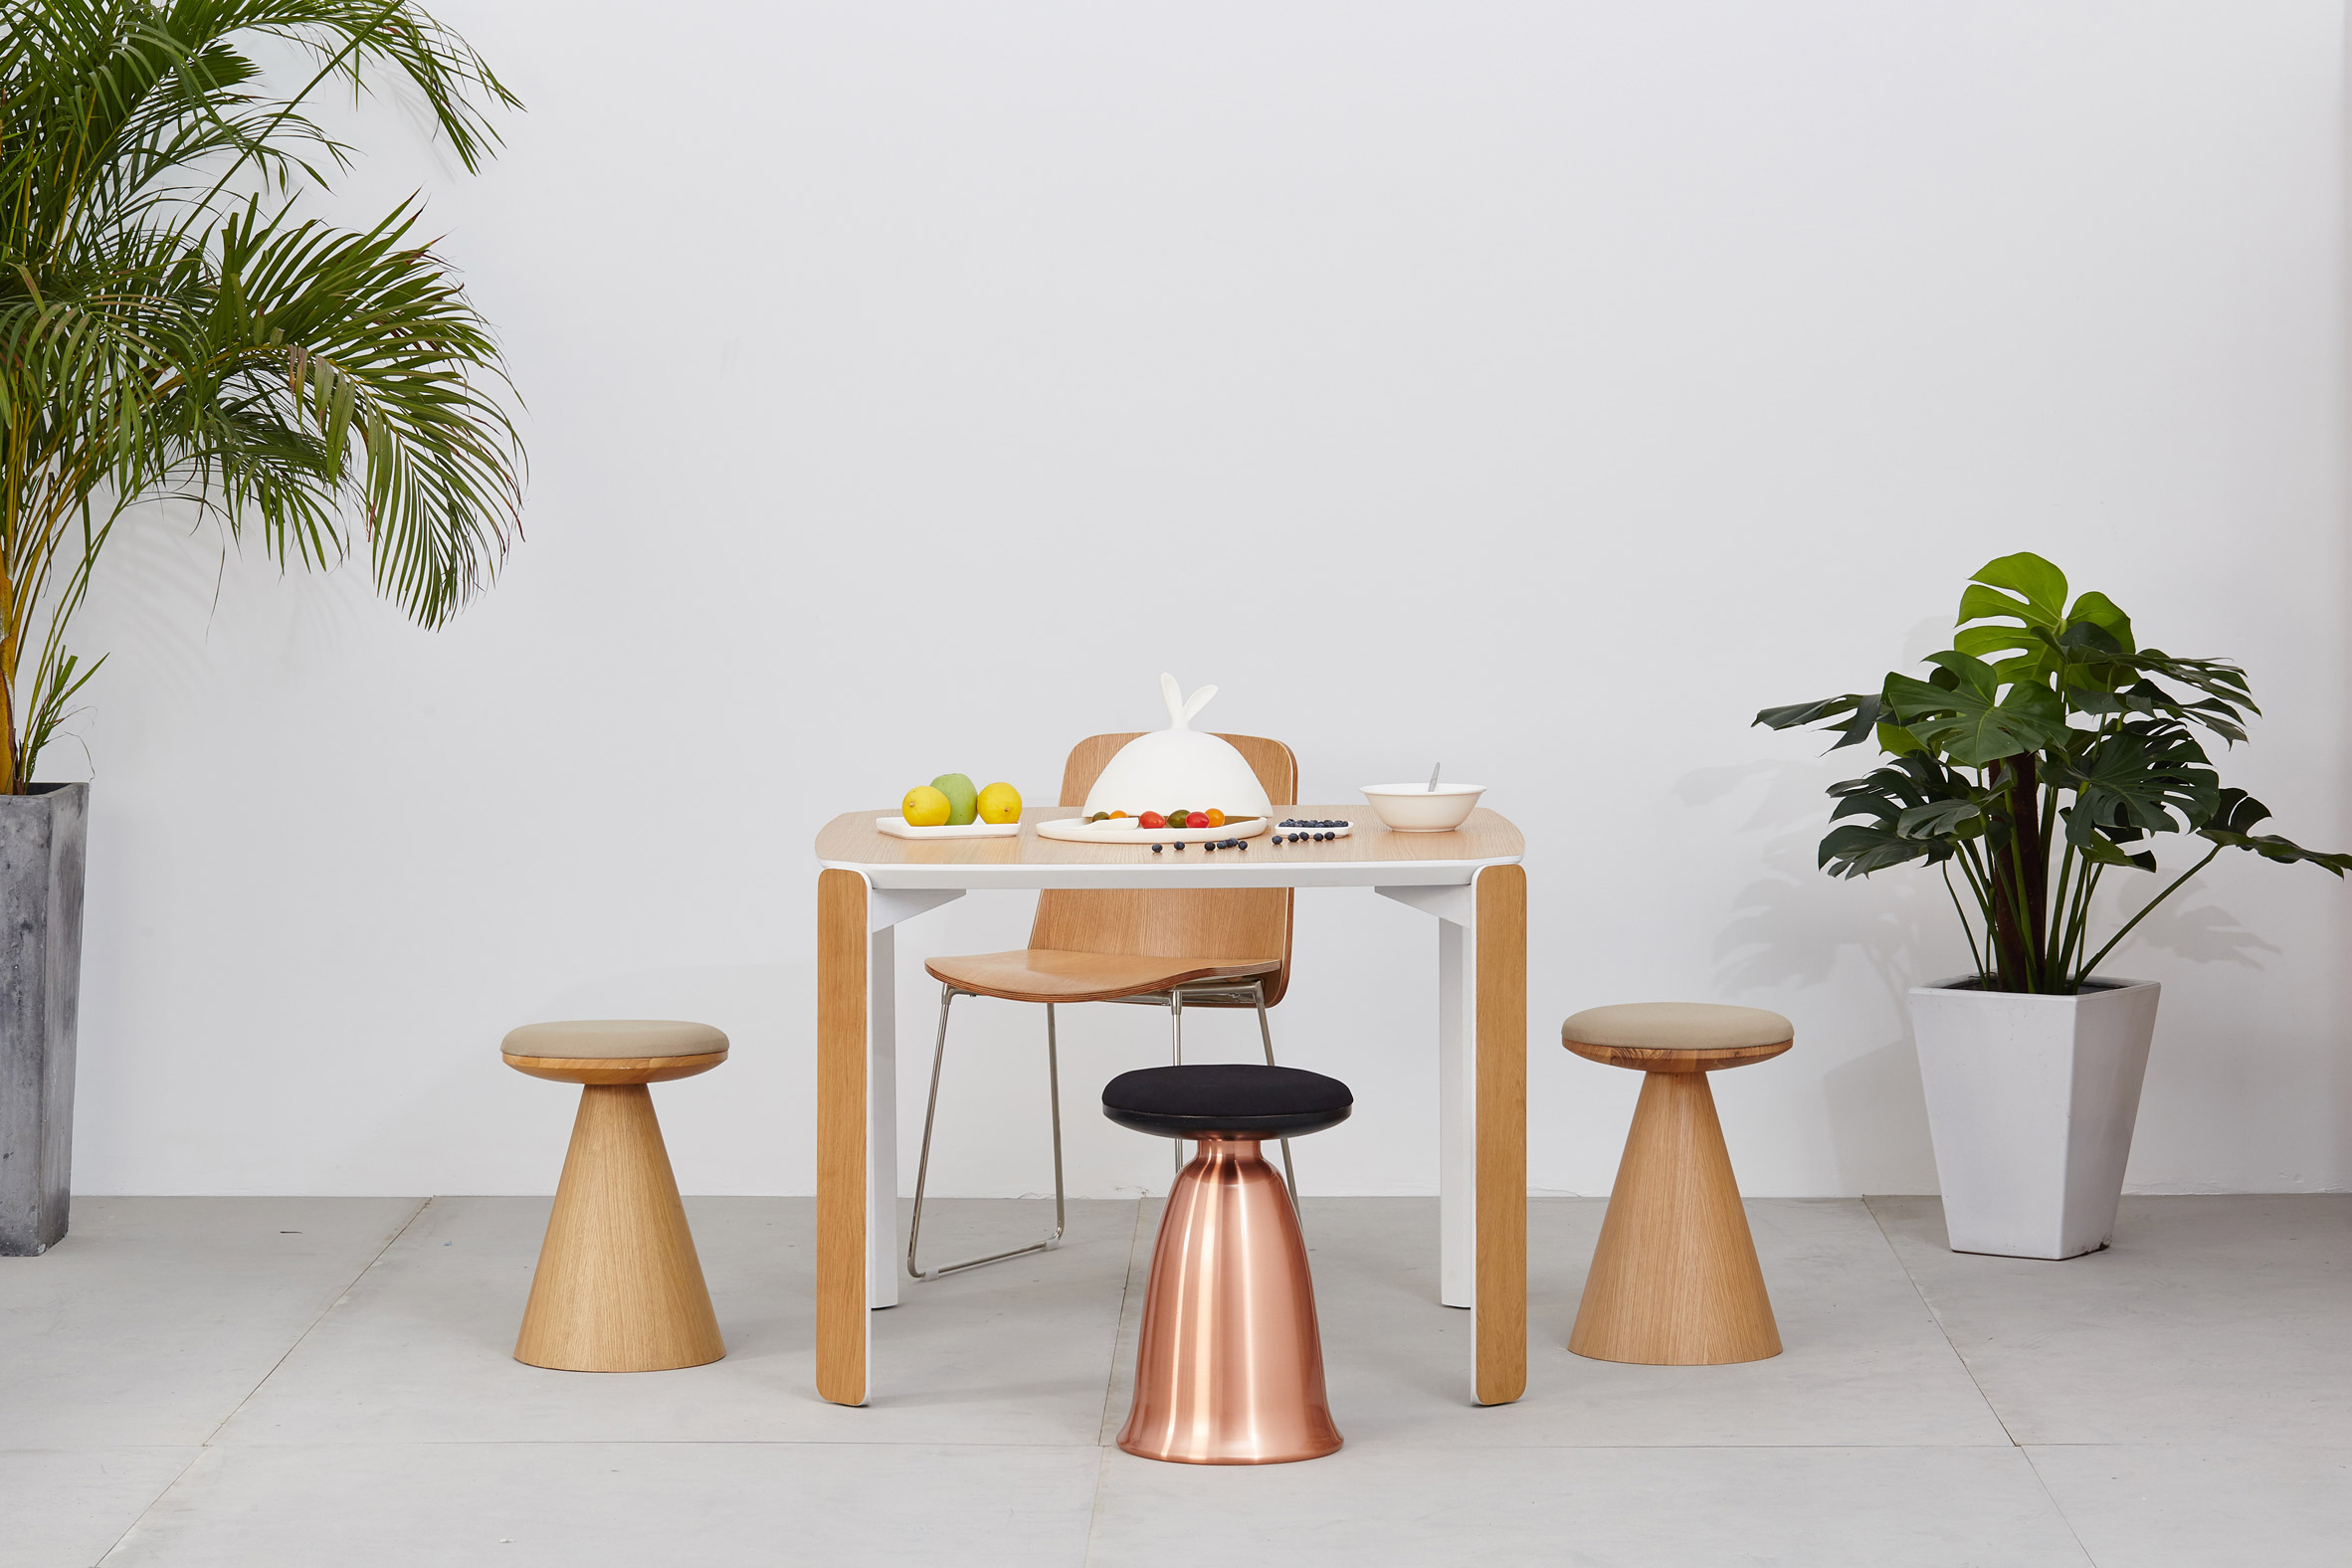 45 table system for Inyard by La Selva